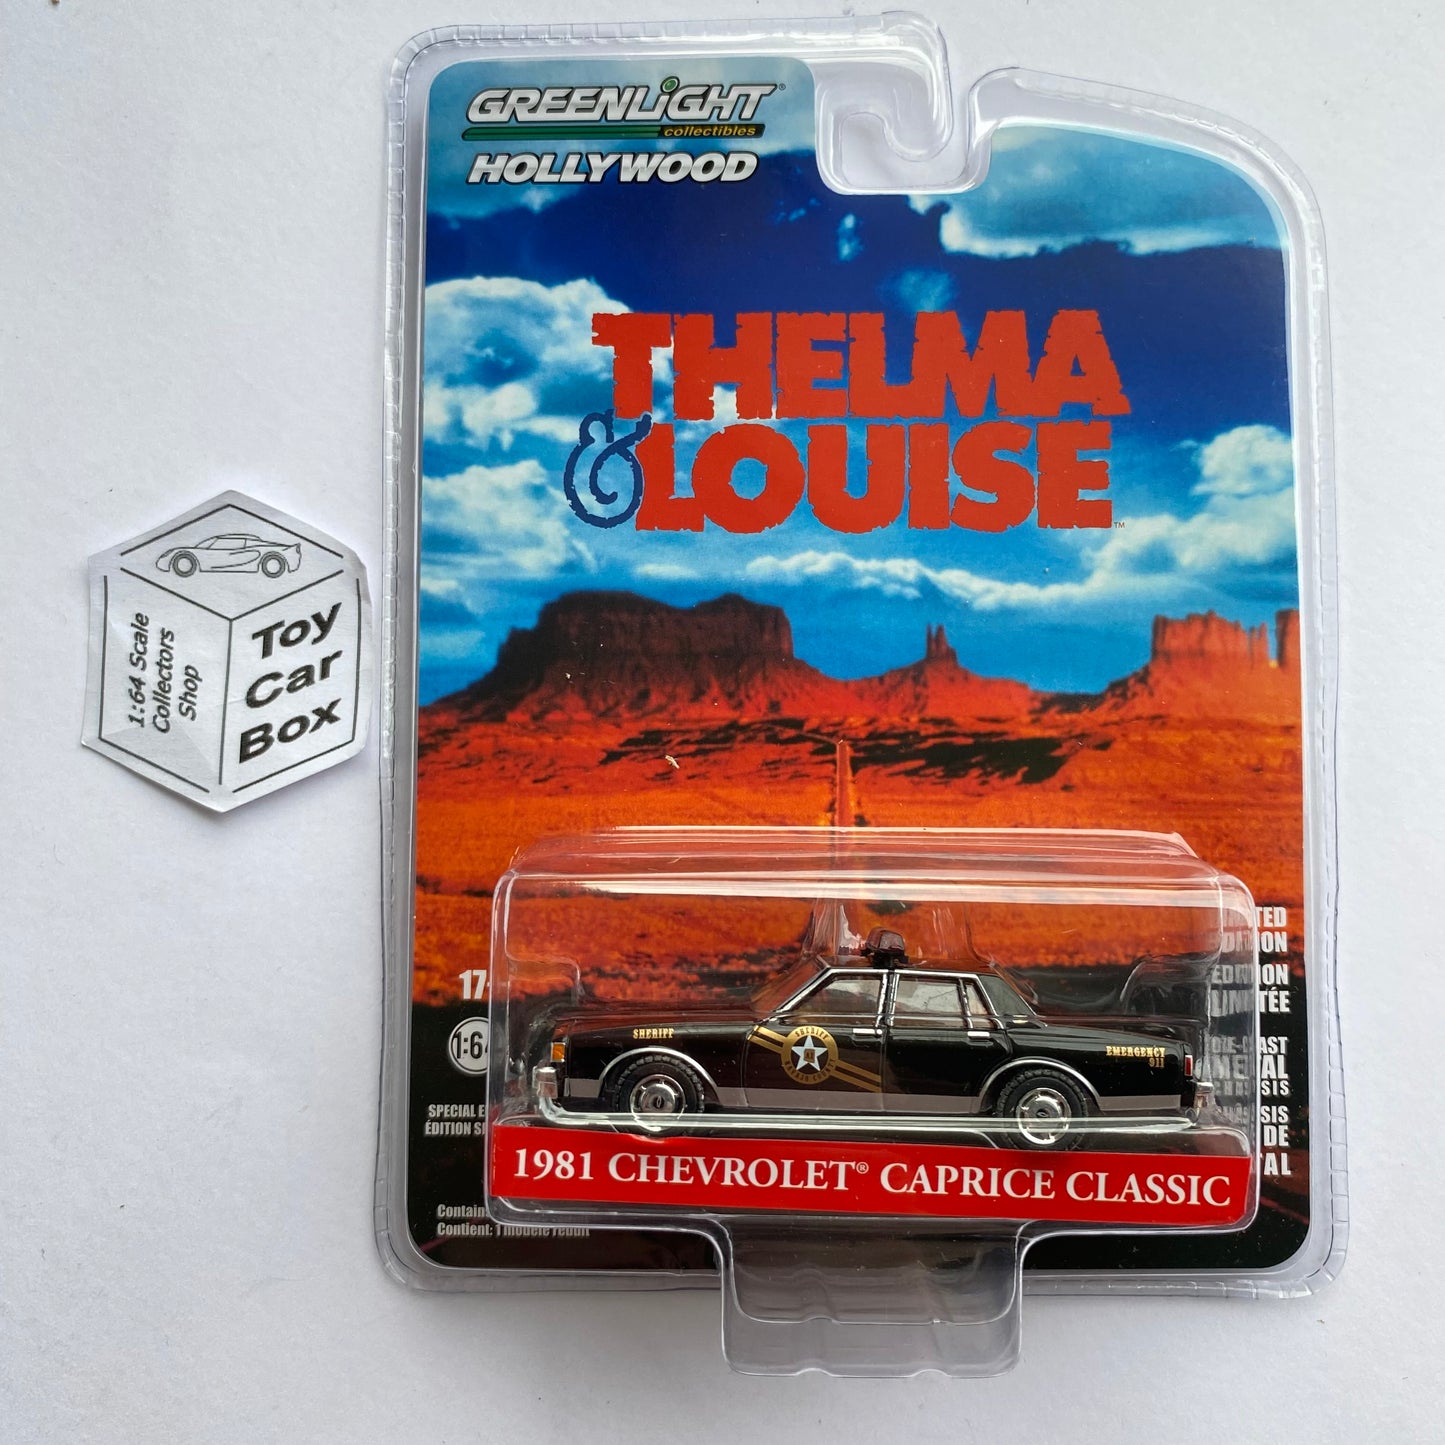 GREENLIGHT - 1981 Chevrolet Caprice Classic (Hollywood - Thelma & Louise) J03